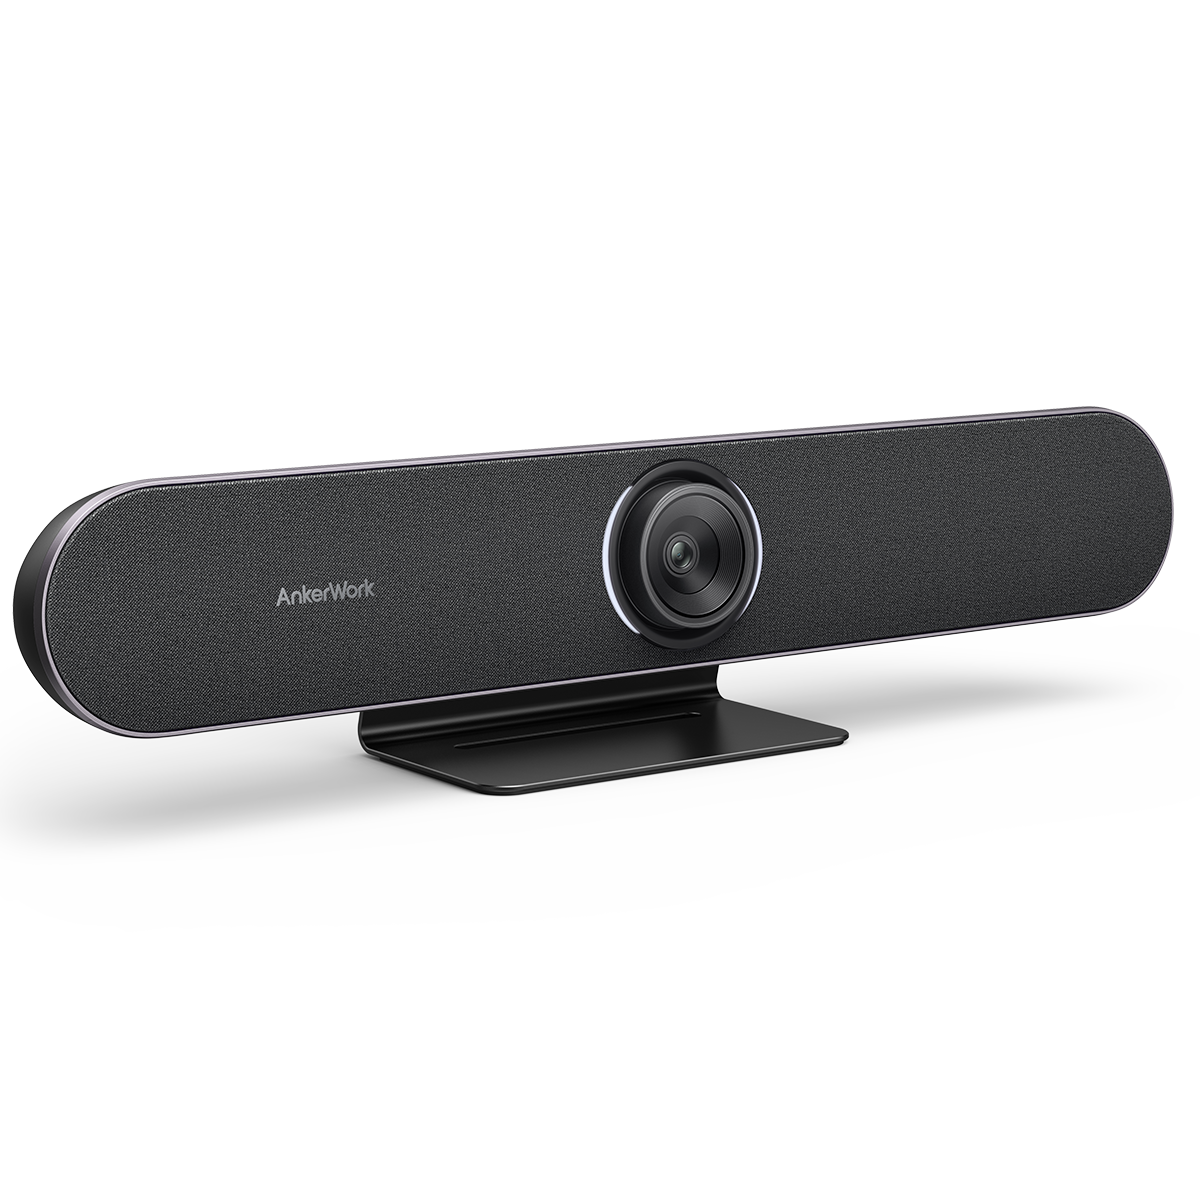 BR300 USB Video Conference Bar